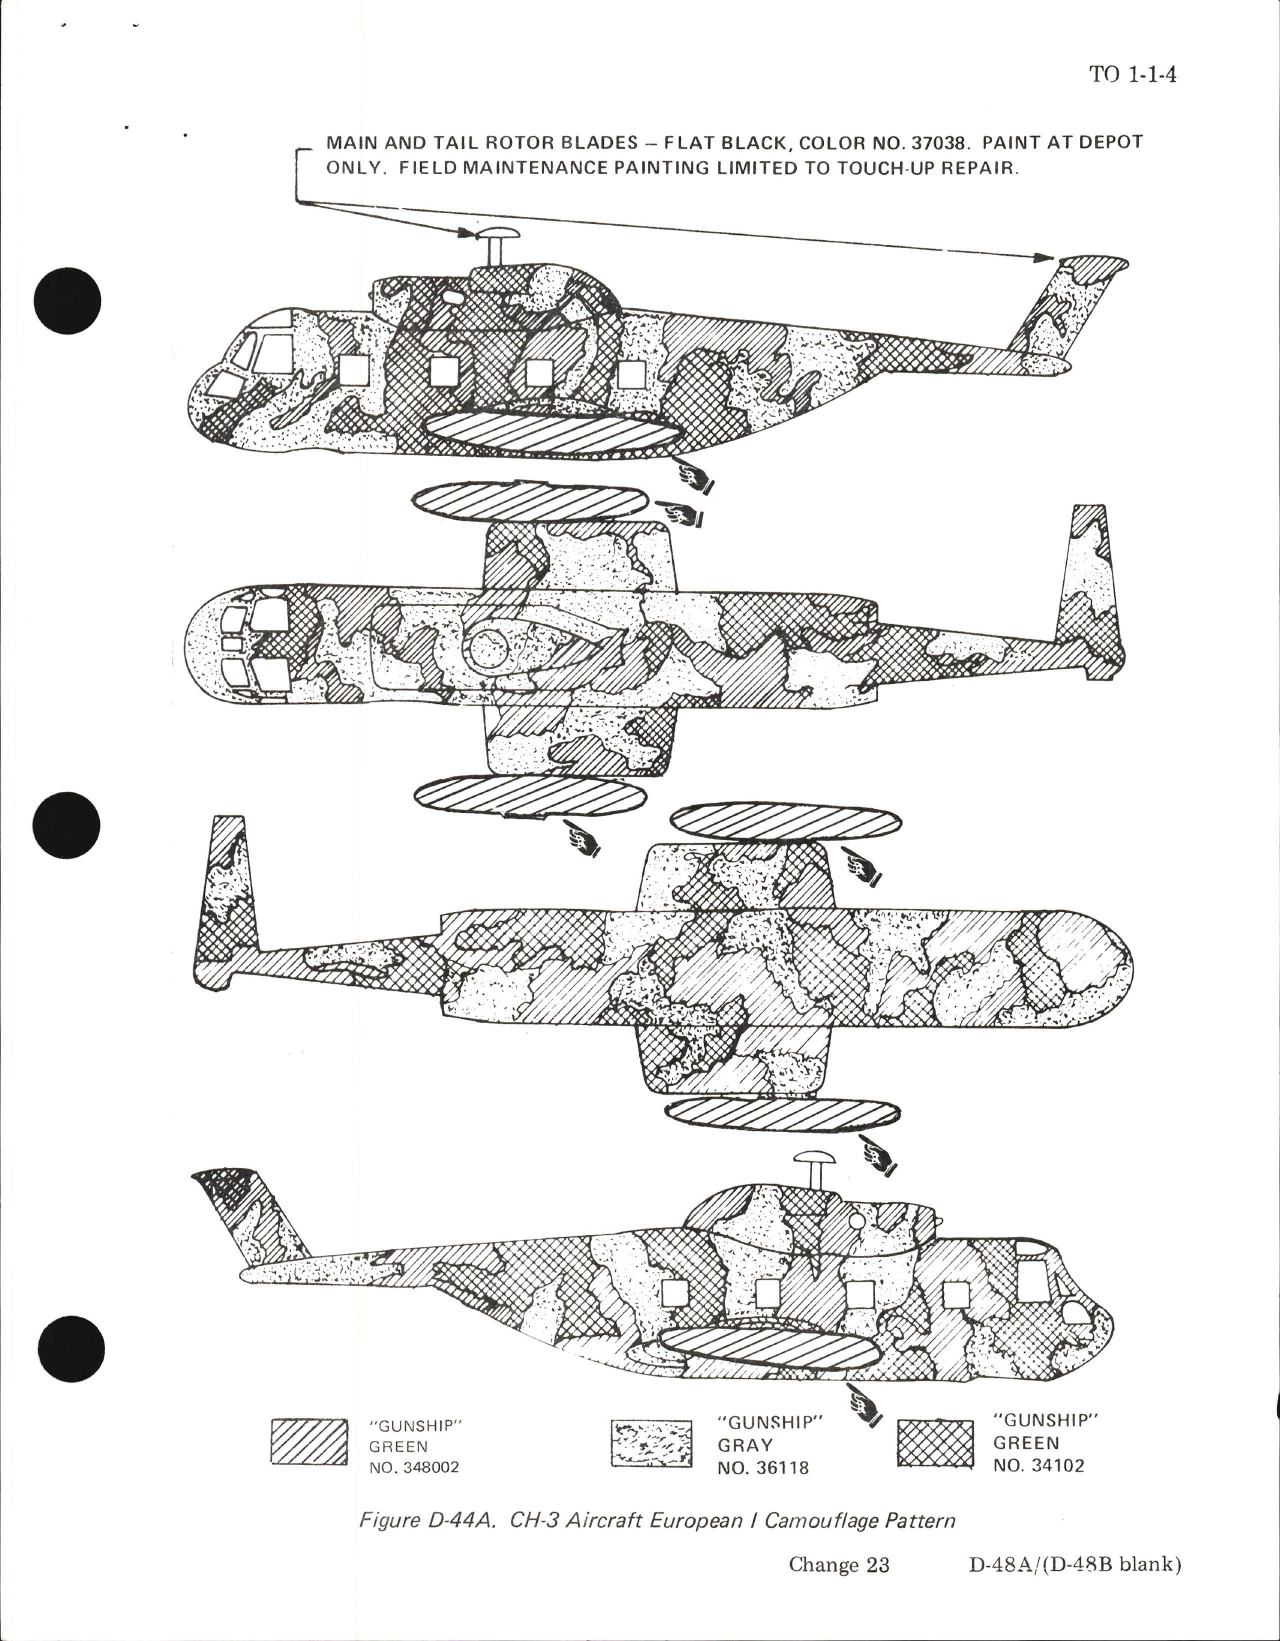 Sample page 5 from AirCorps Library document: Exterior Finishes, Insignia and Markings for USAF Aircraft - Change - 23